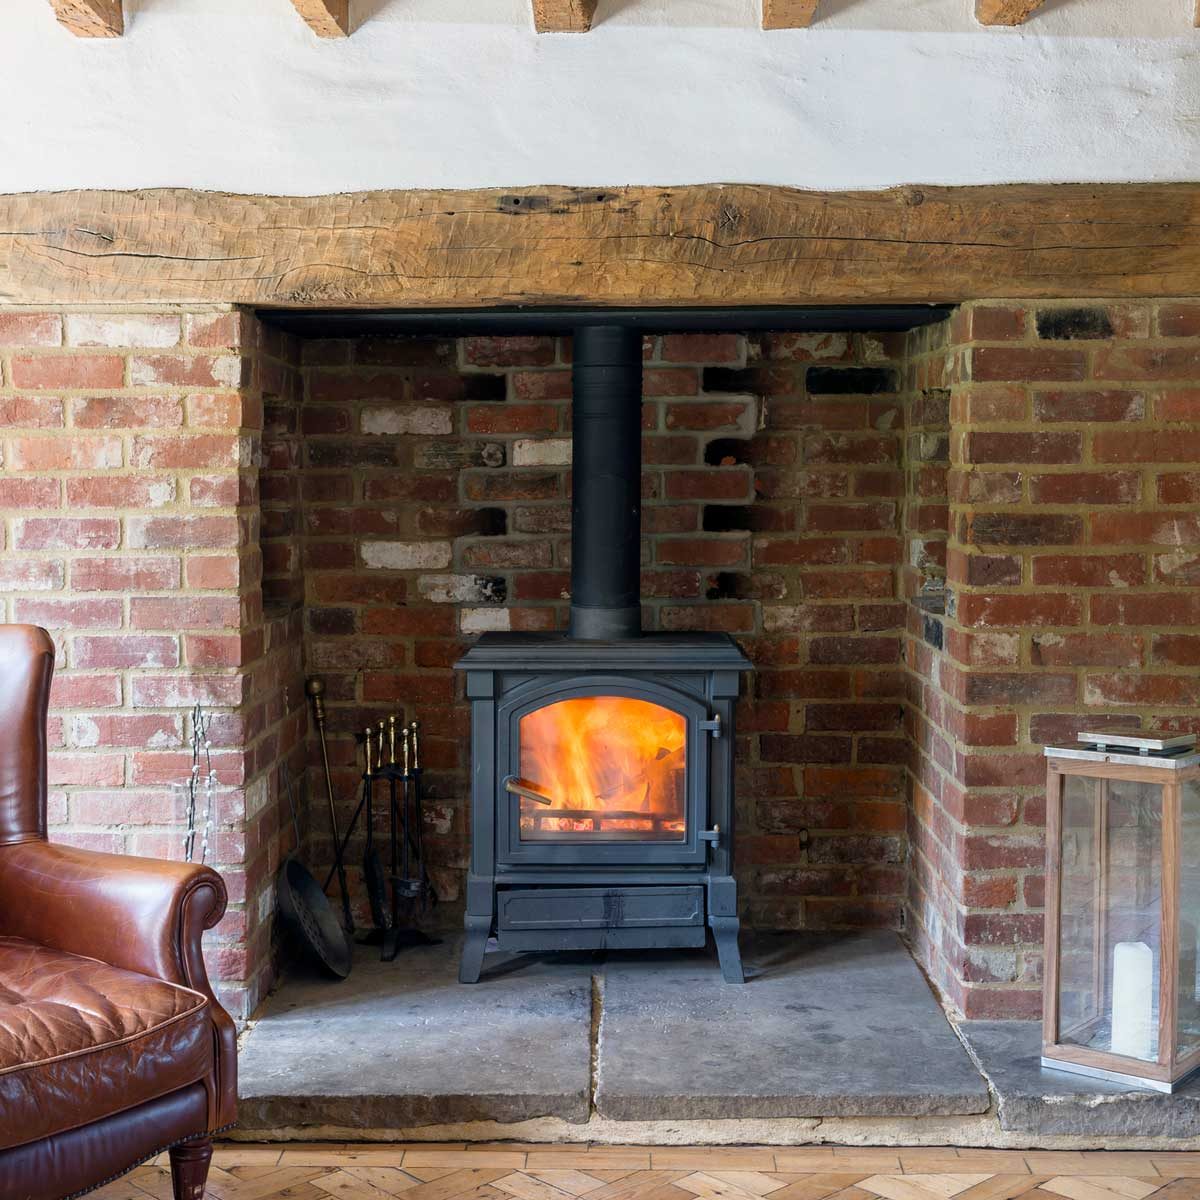 Wood stove in traditional brick fireplace